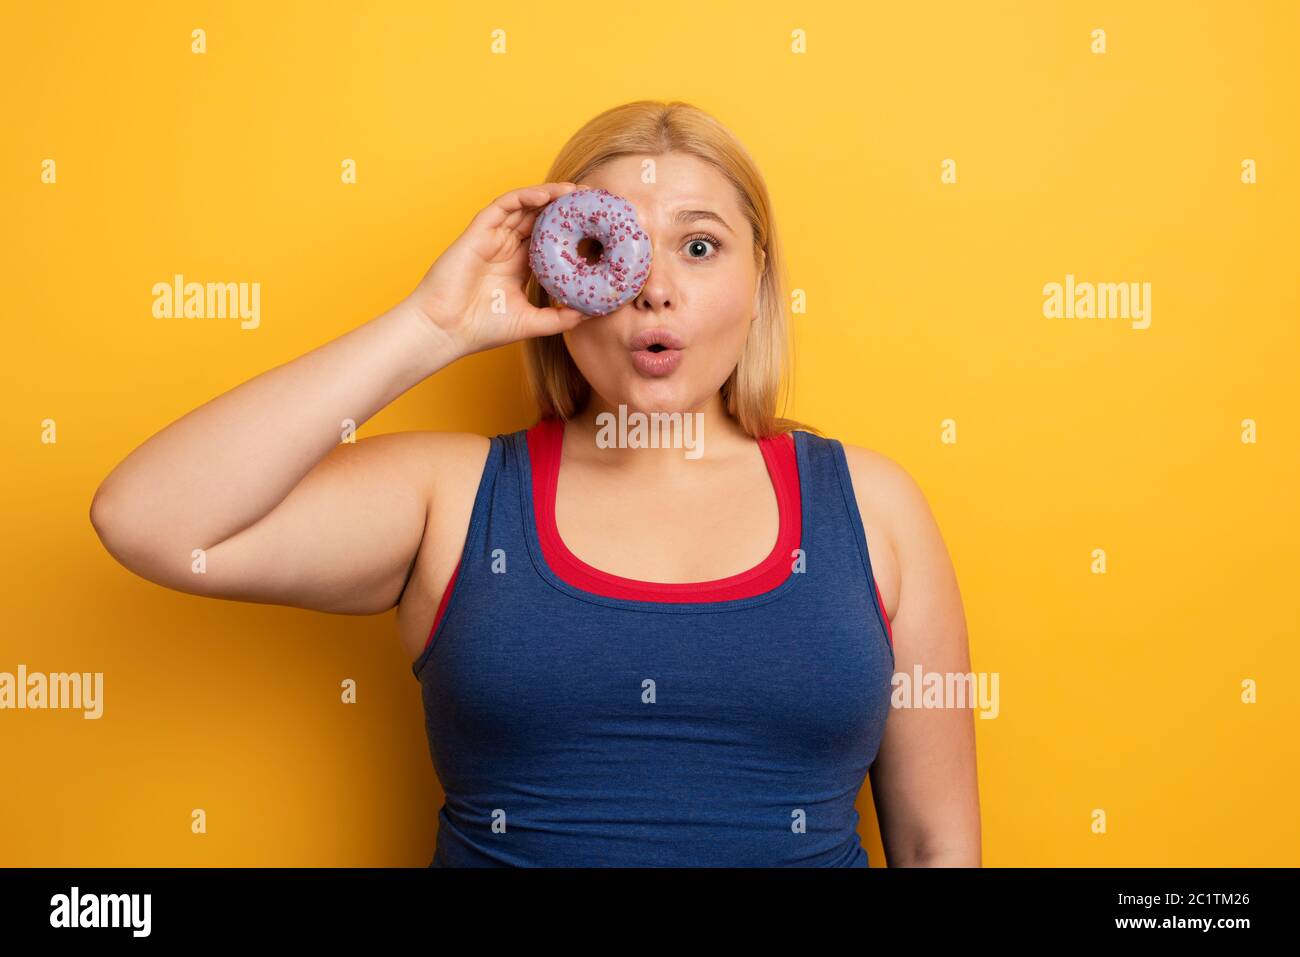 Fat girl eats sweet instead of do gym. Cyan background Stock Photo